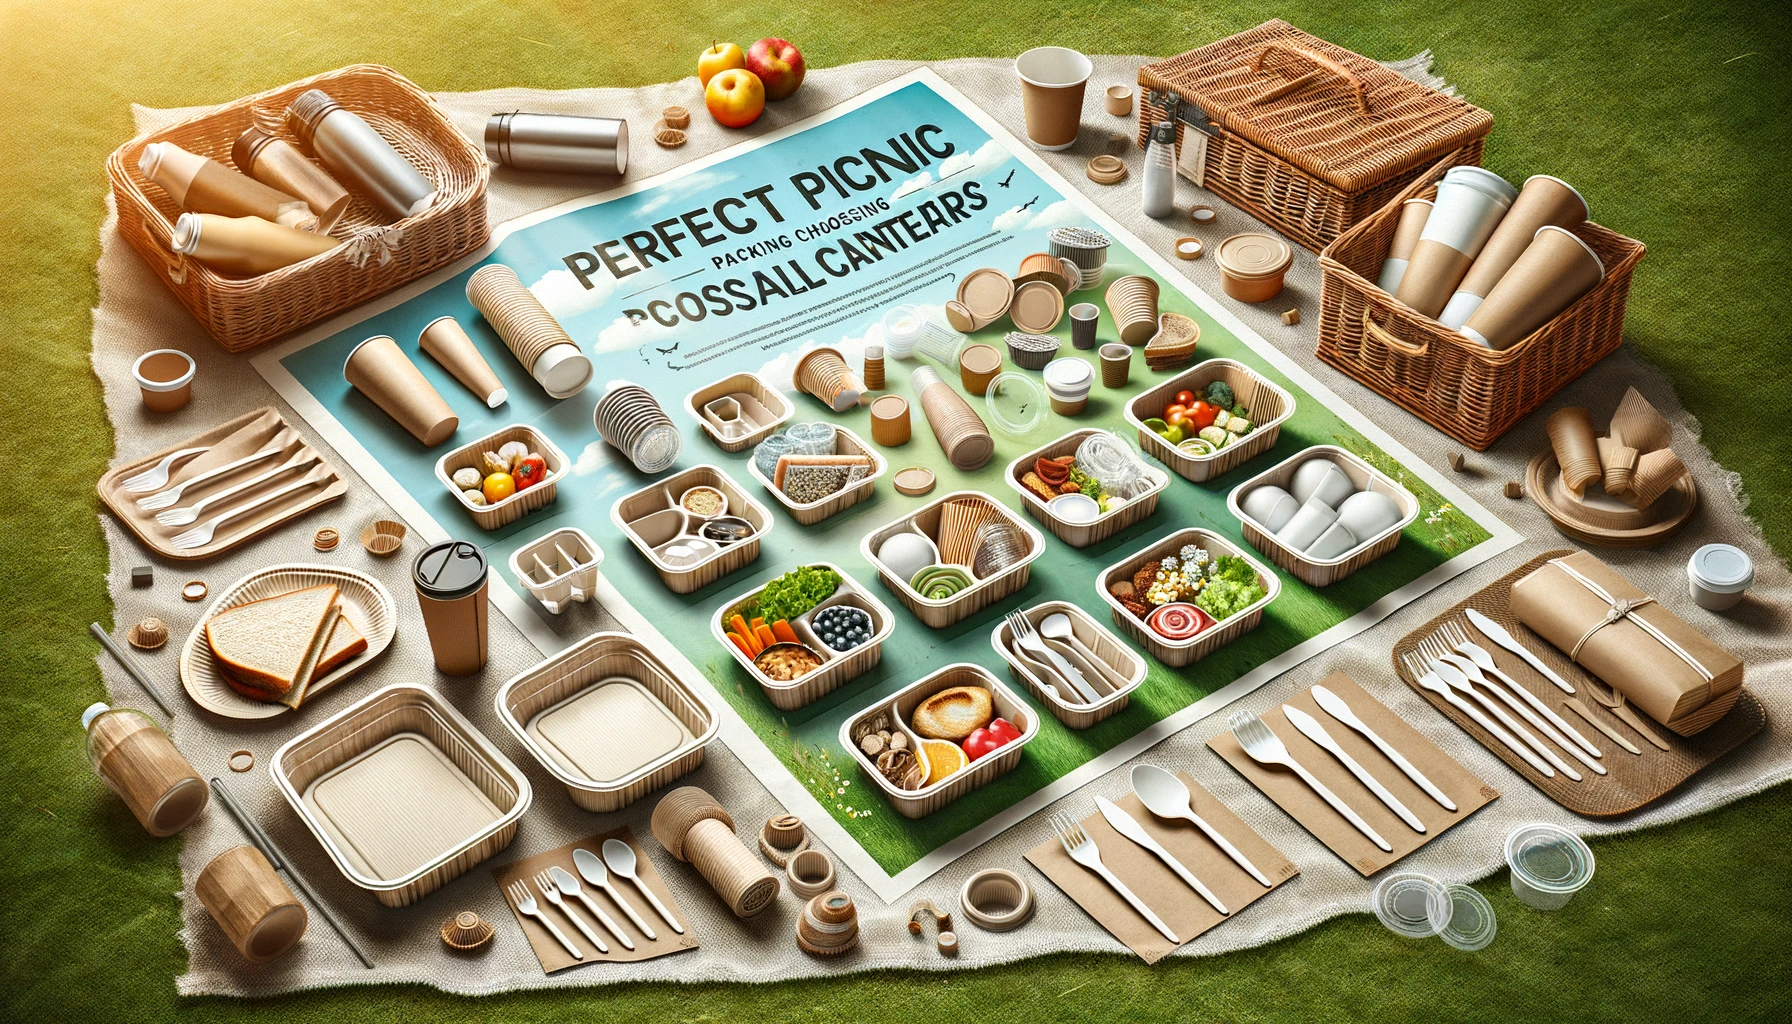 Perfect Picnic Packaging: Choosing Disposable Containers for Your Outdoor Feast